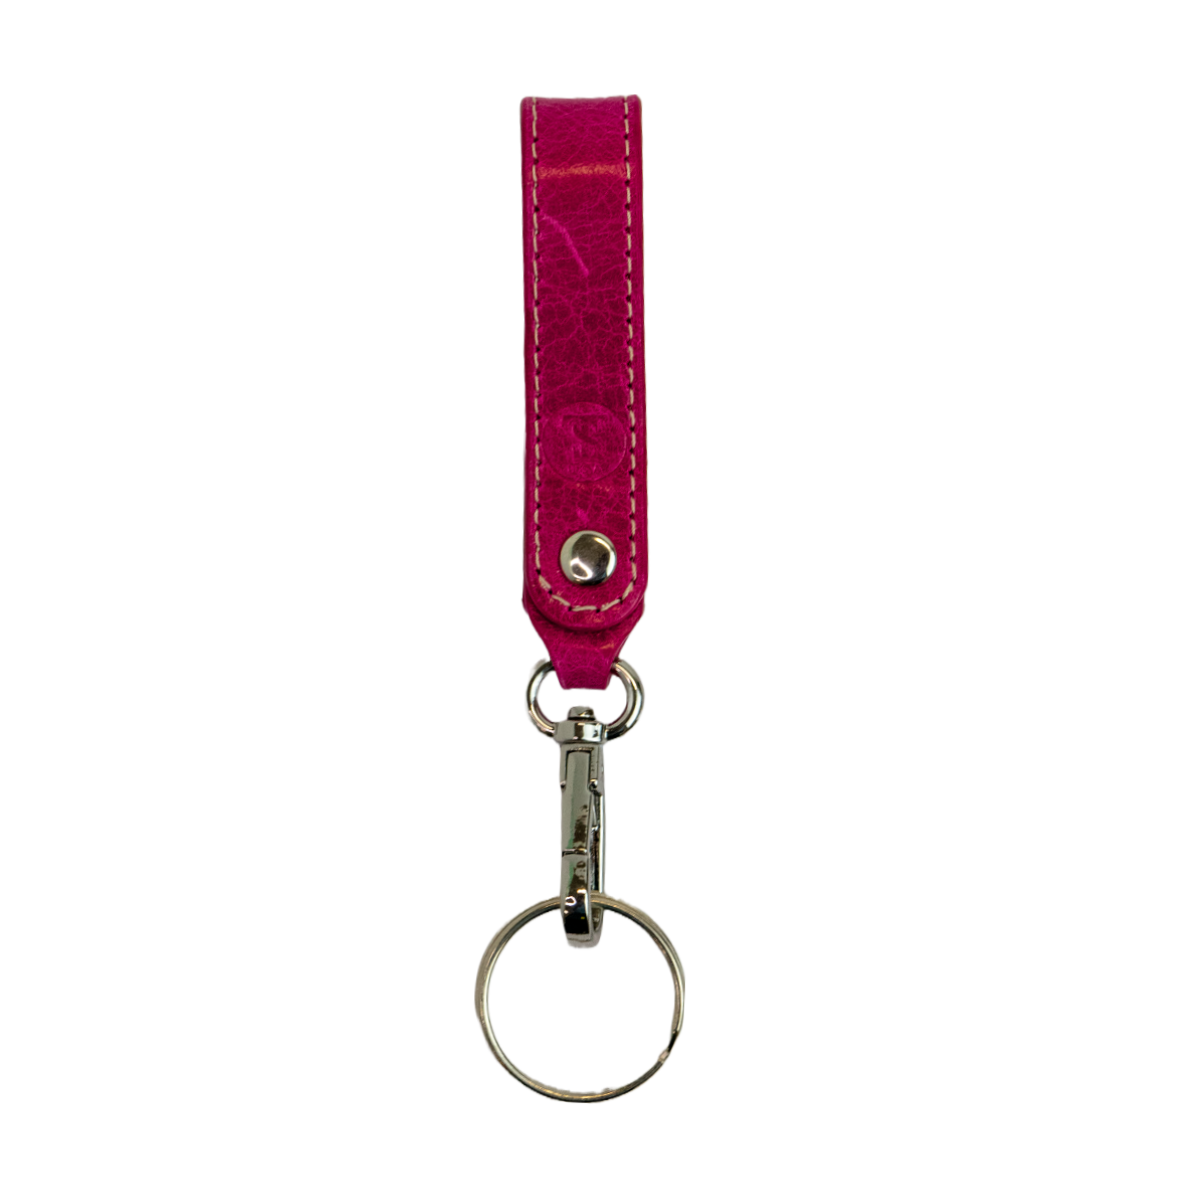 T5 Key chain strap handcrafted by designer Liv McClintock in smooth calf leather in hot Barbie pink.